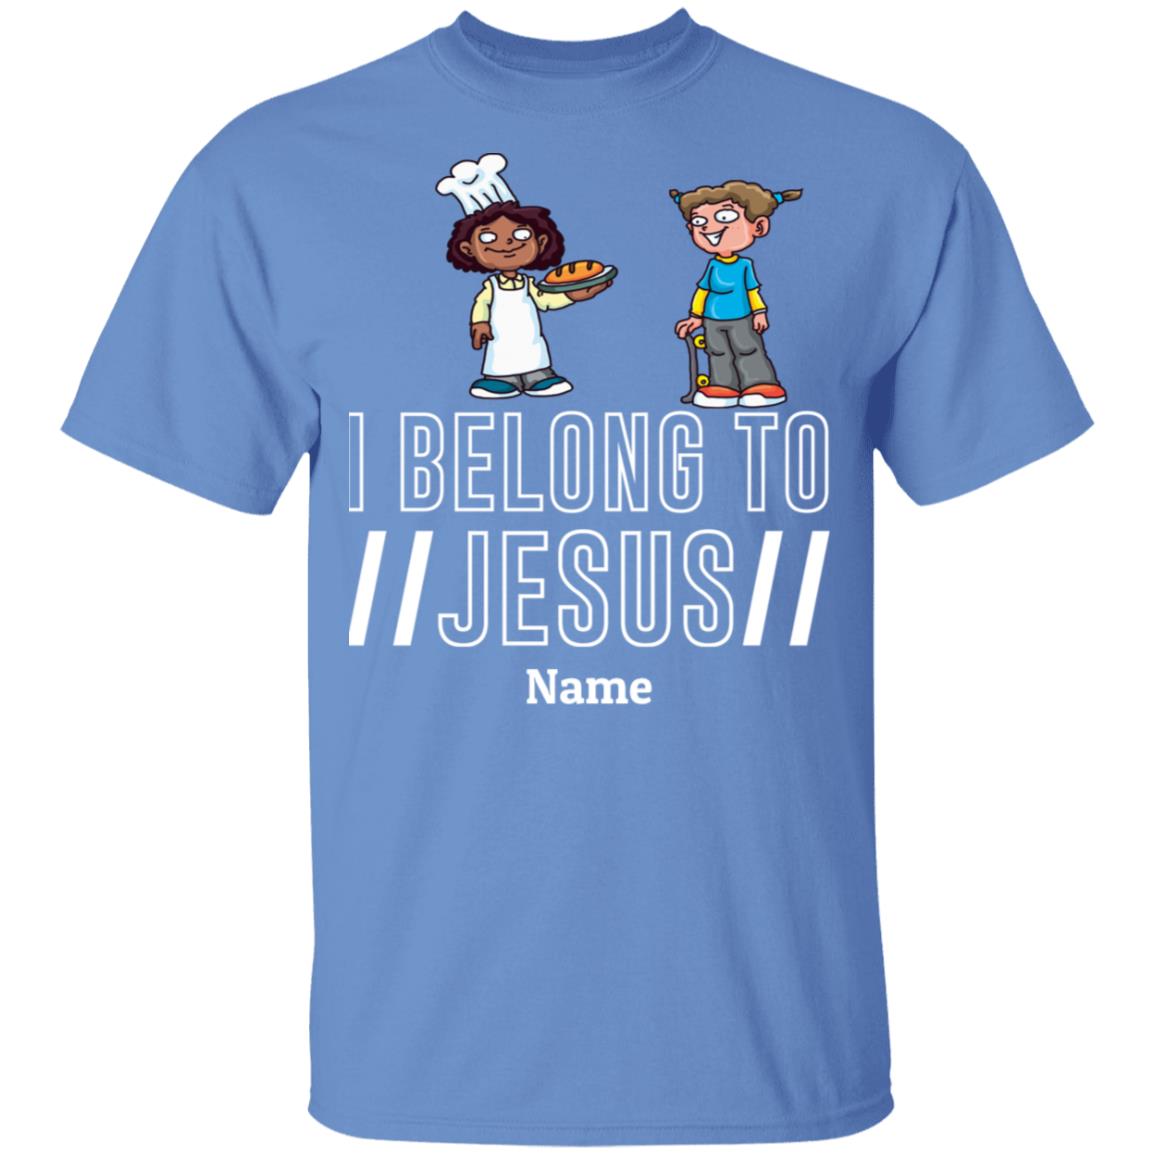 T-Shirts - Personalized Christian Themed Youth T-shirts - I Belong To Jesus